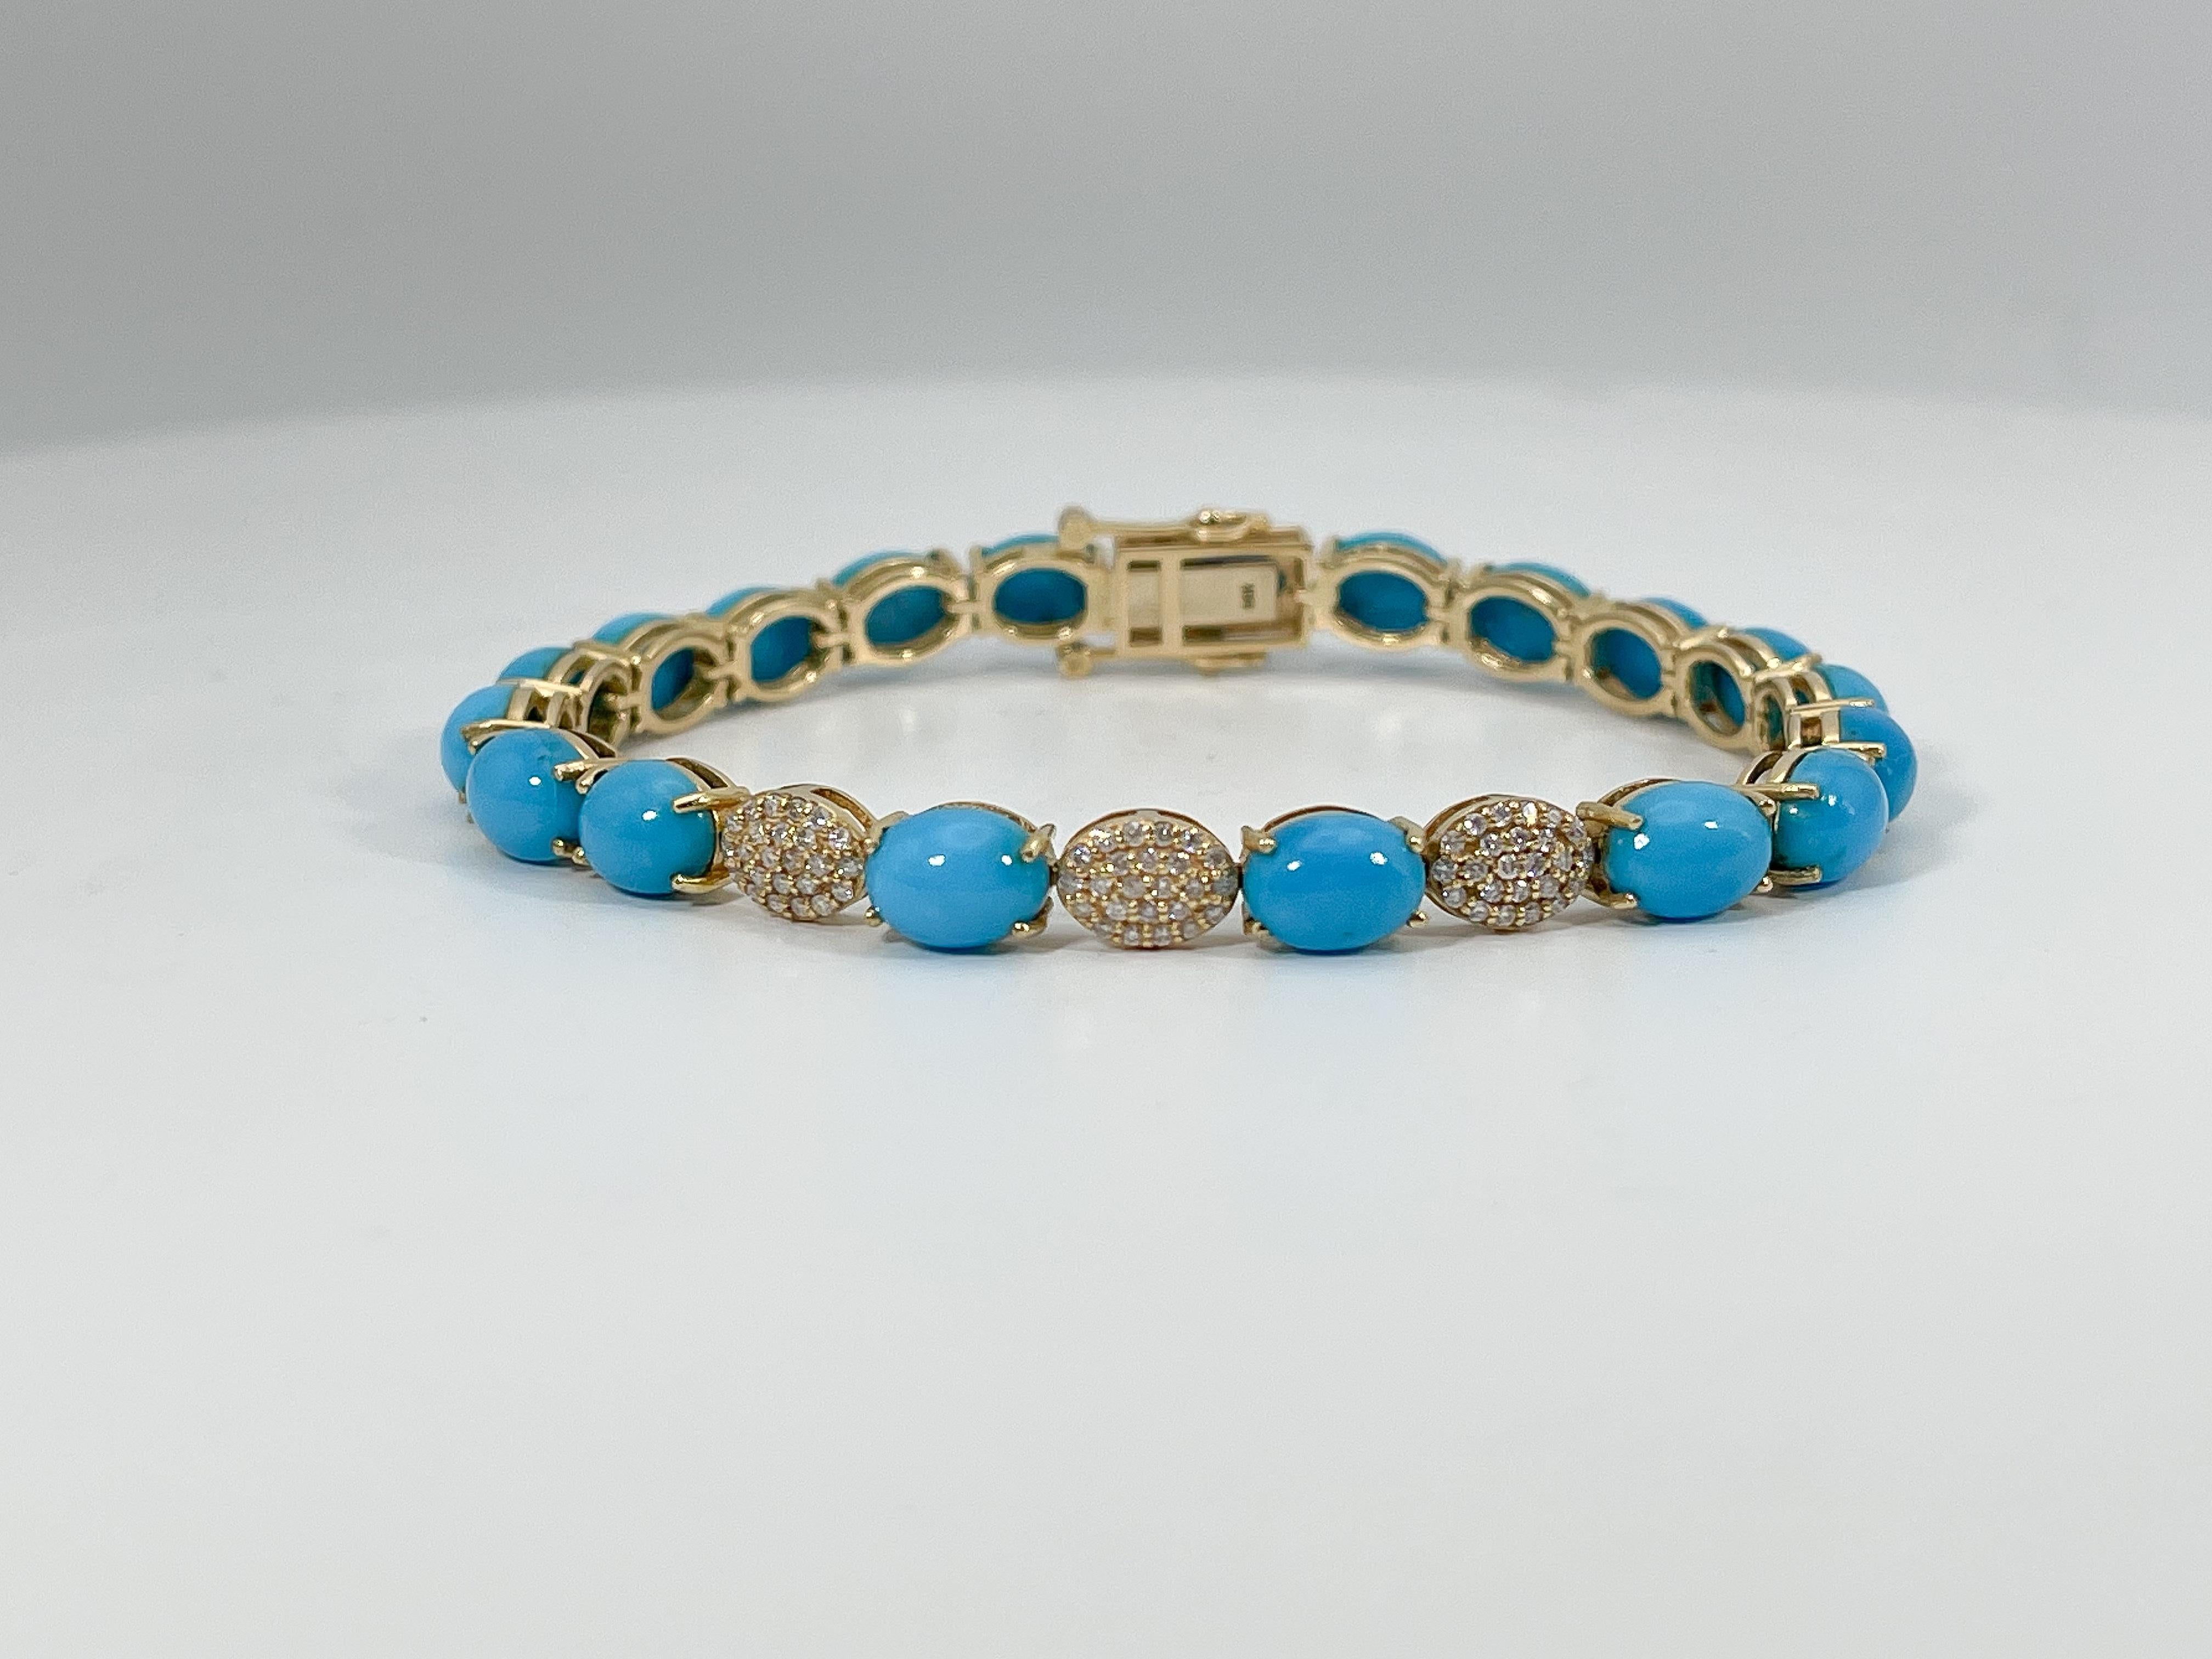 14k yellow gold .45 CTW Cabo turquoise bracelet. The turquoise stones are oval cut, the diamonds are round, forming the shape of an oval. The bracelet has a figure 8 clasp for security, the width of the bracelet is 6.1 mm, the length is 7 inches,